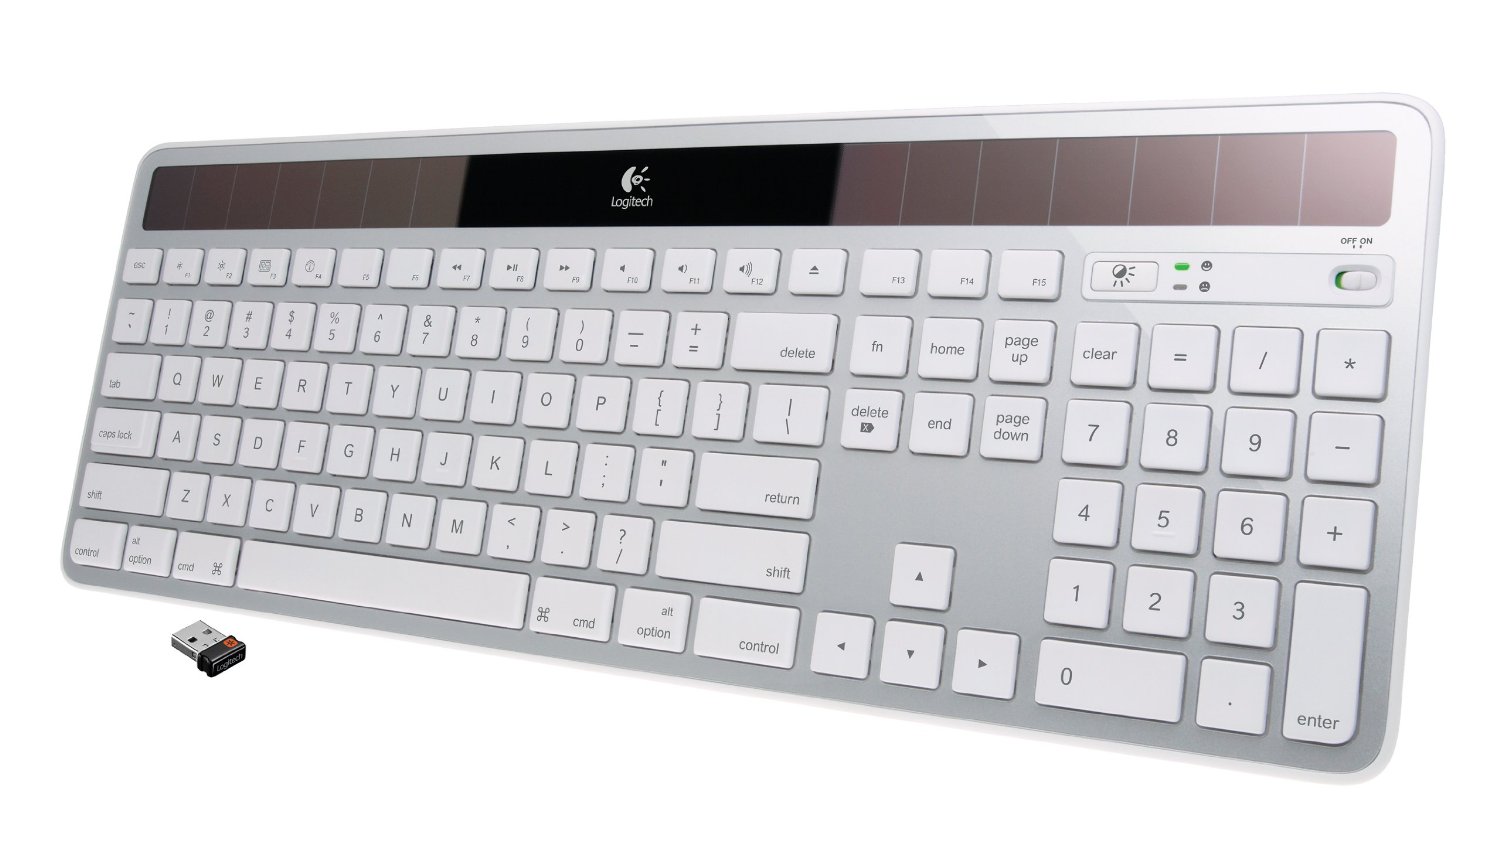 skøjte Limited Andesbjergene My Wireless Keyboard Never Needs Batteries or Re-Charging! | Macs in Law